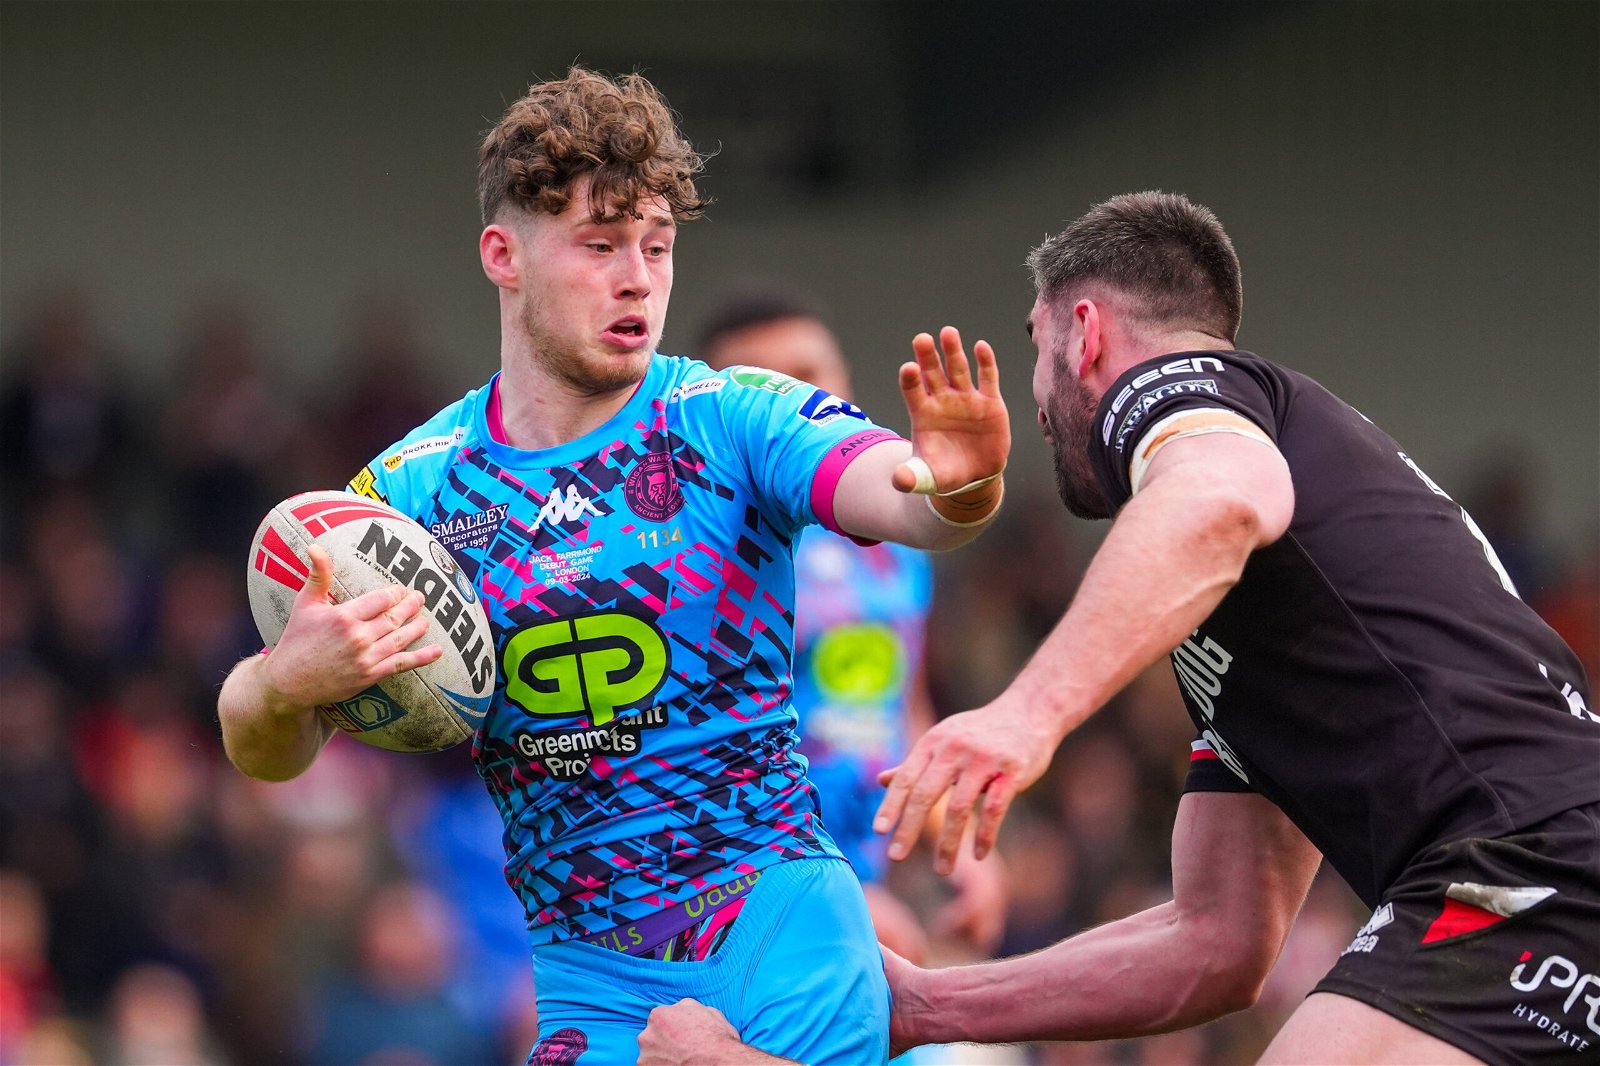 Wigan's Jack Farrimond is tackled against London Broncos.